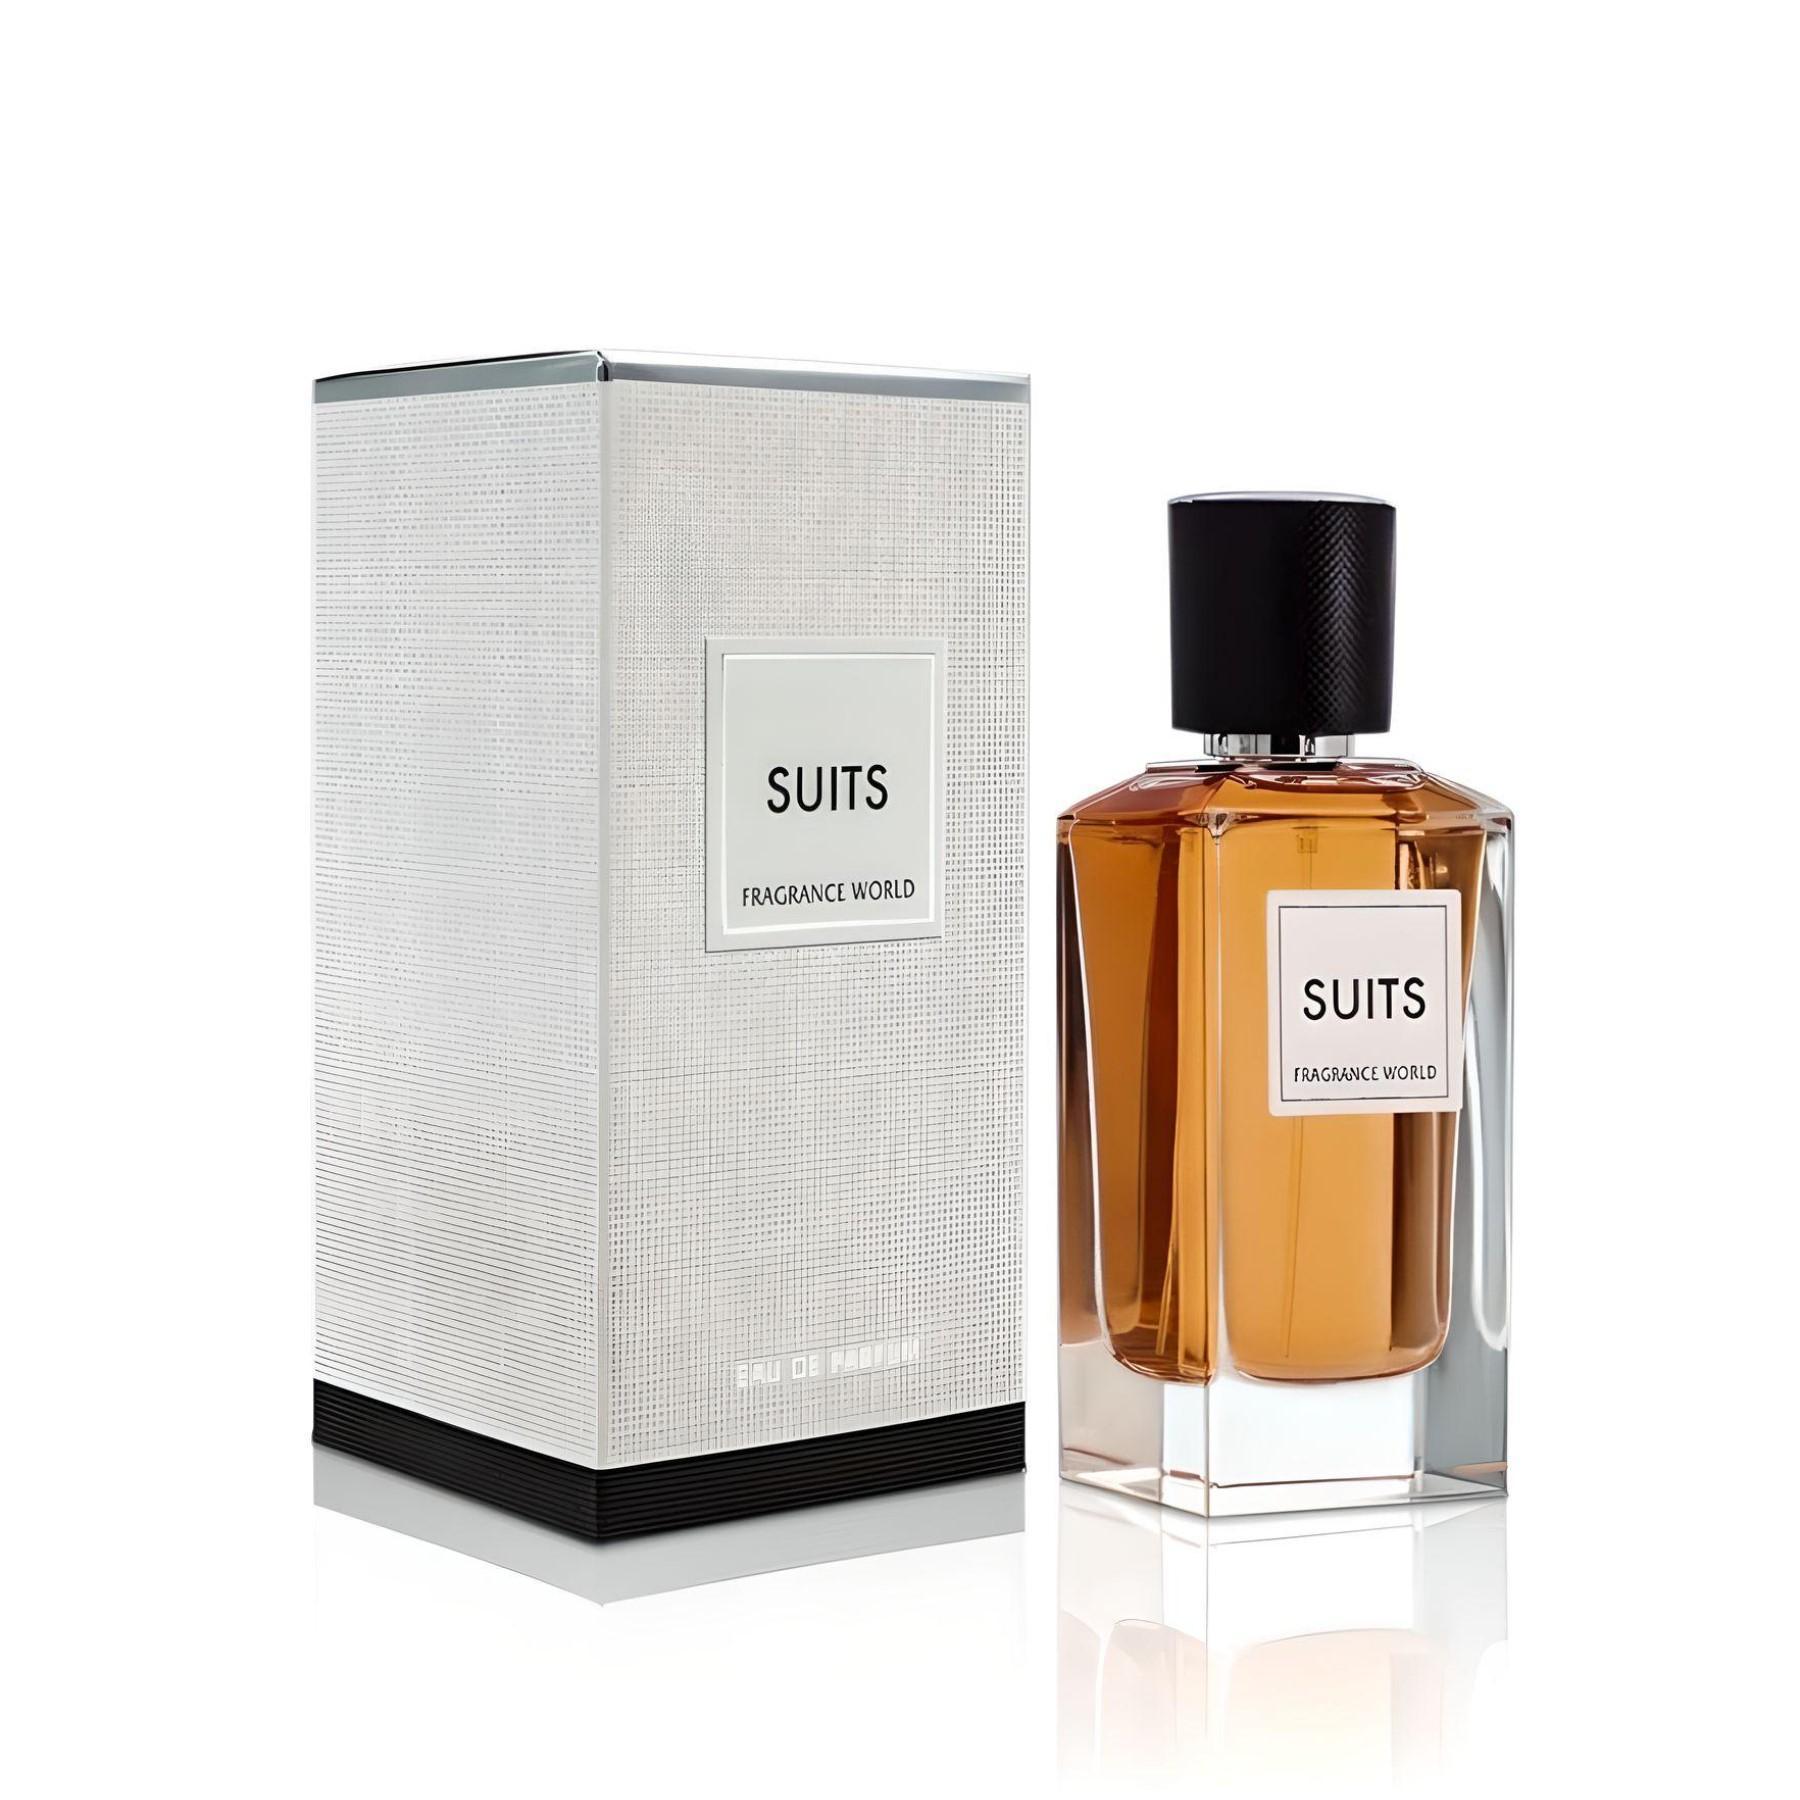 Suits Perfume Eau De Parfum By Fragrance World (Inspired By Ysl Tuxedo)